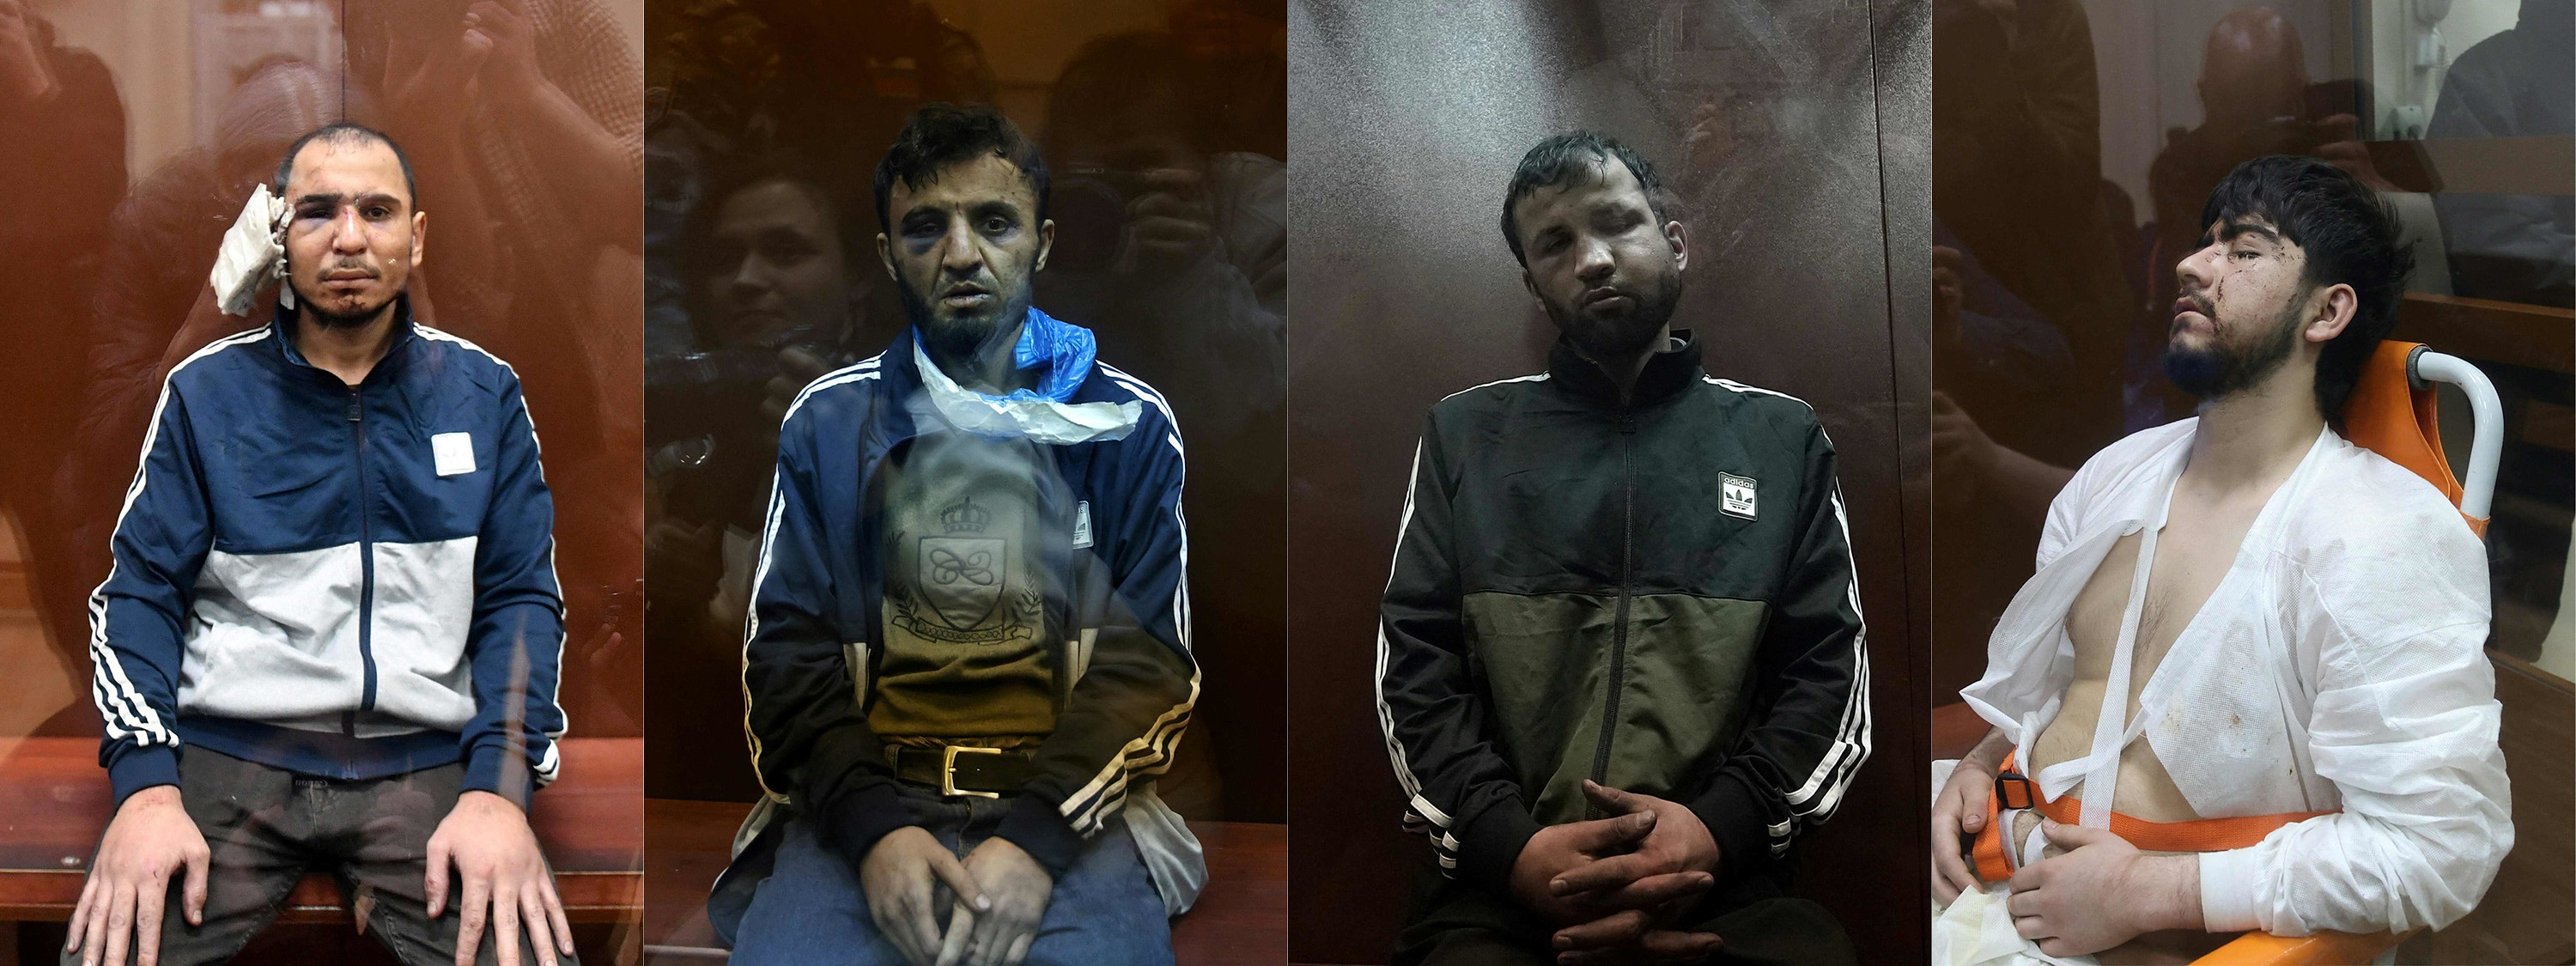 Moscow attack: who are the four suspects placed in pre-trial detention for terrorism?